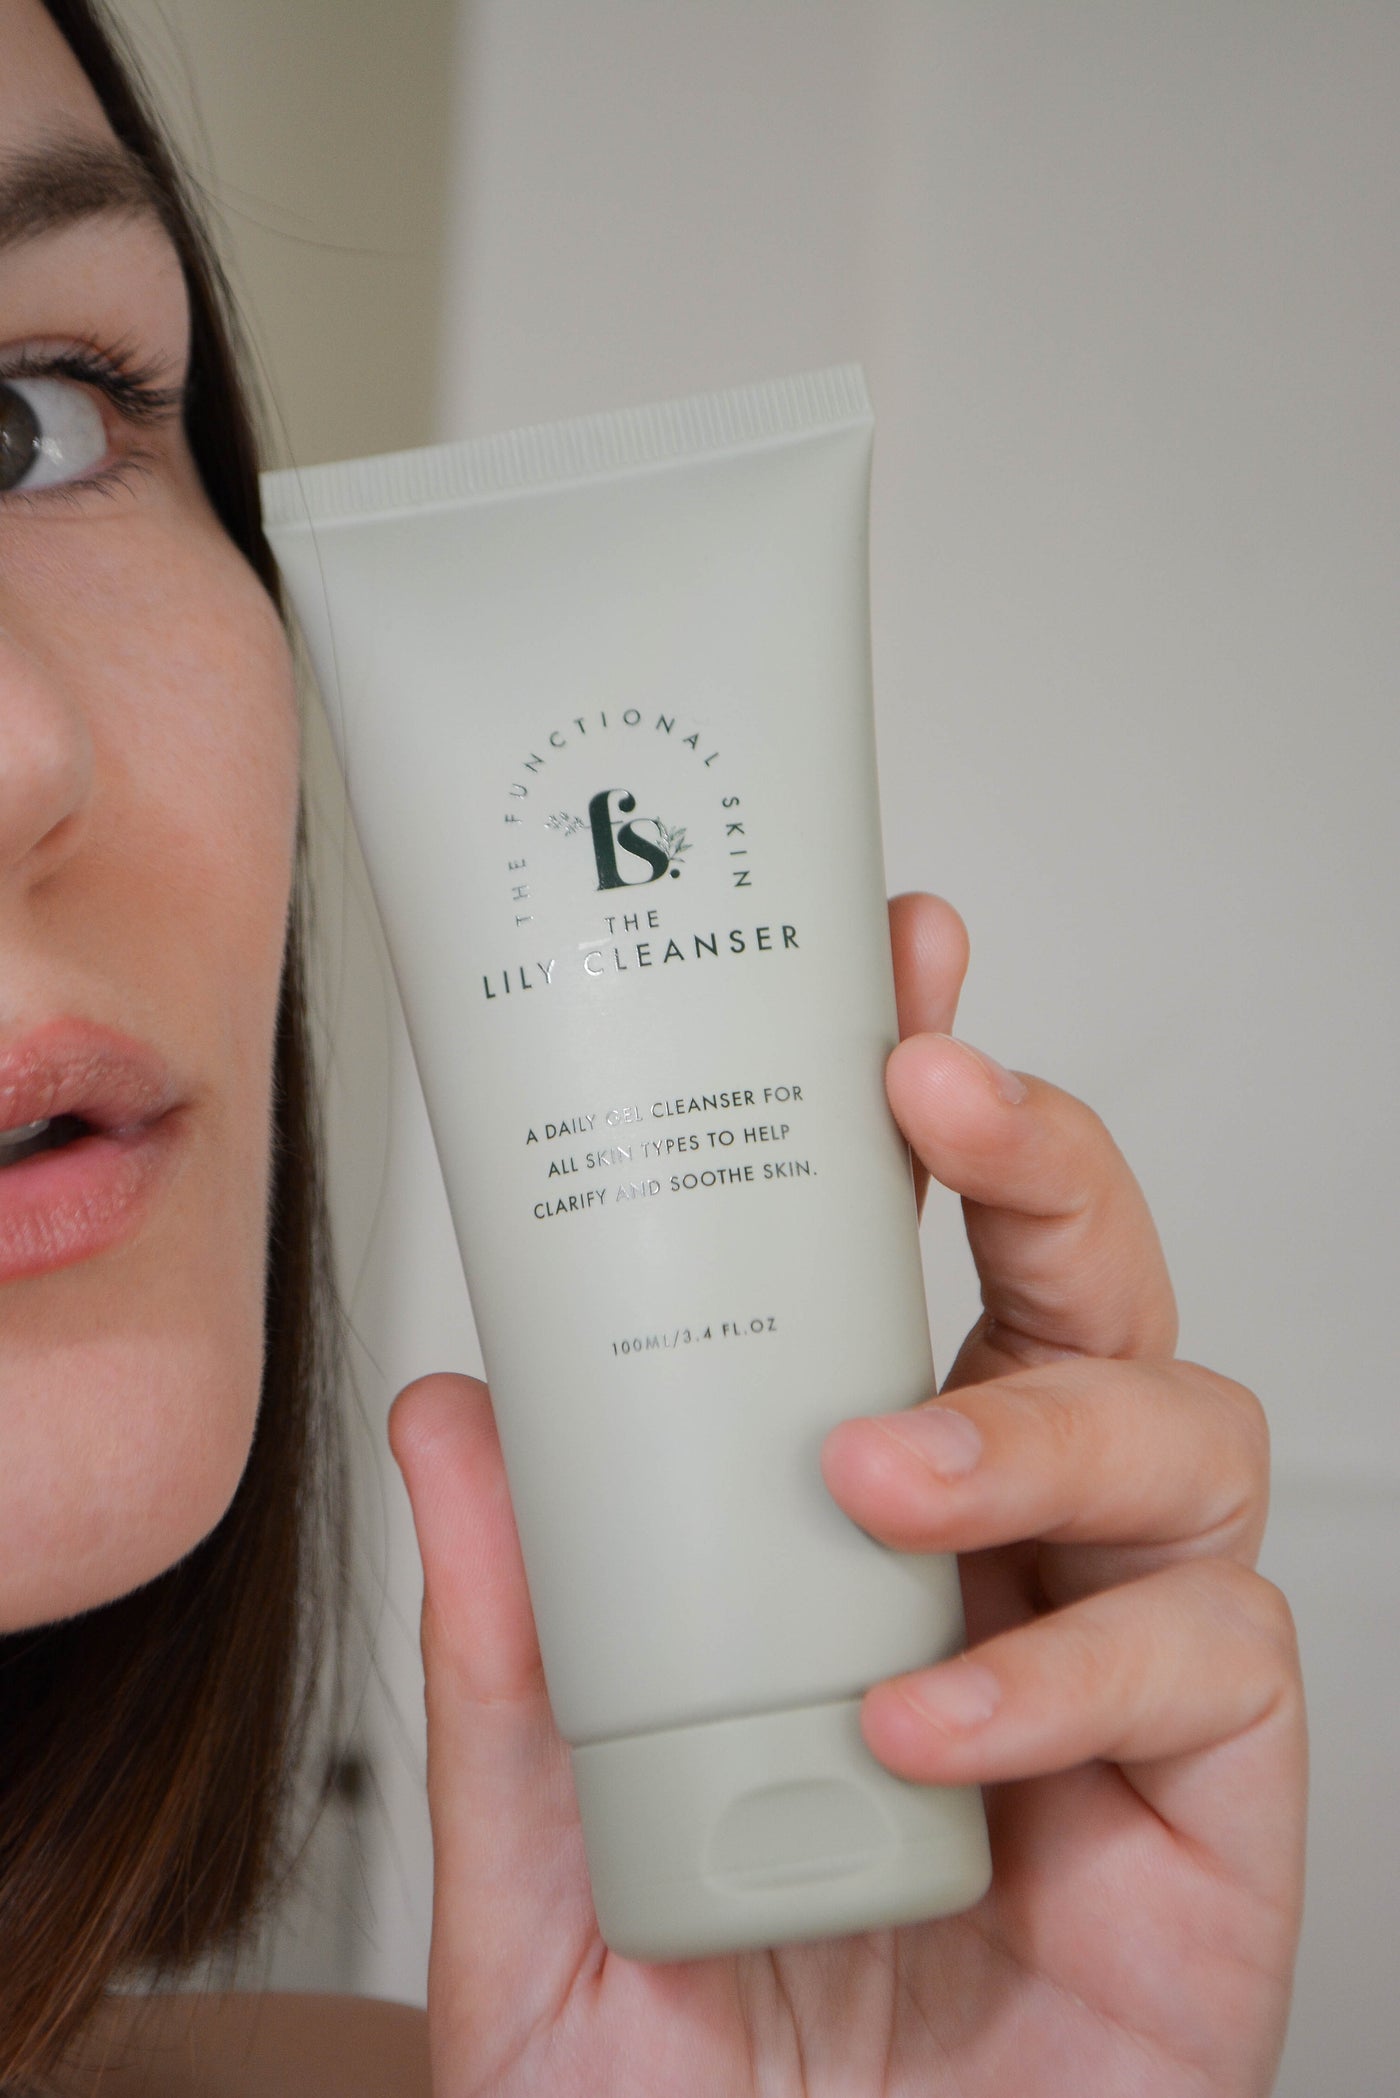 The Lily Cleanser